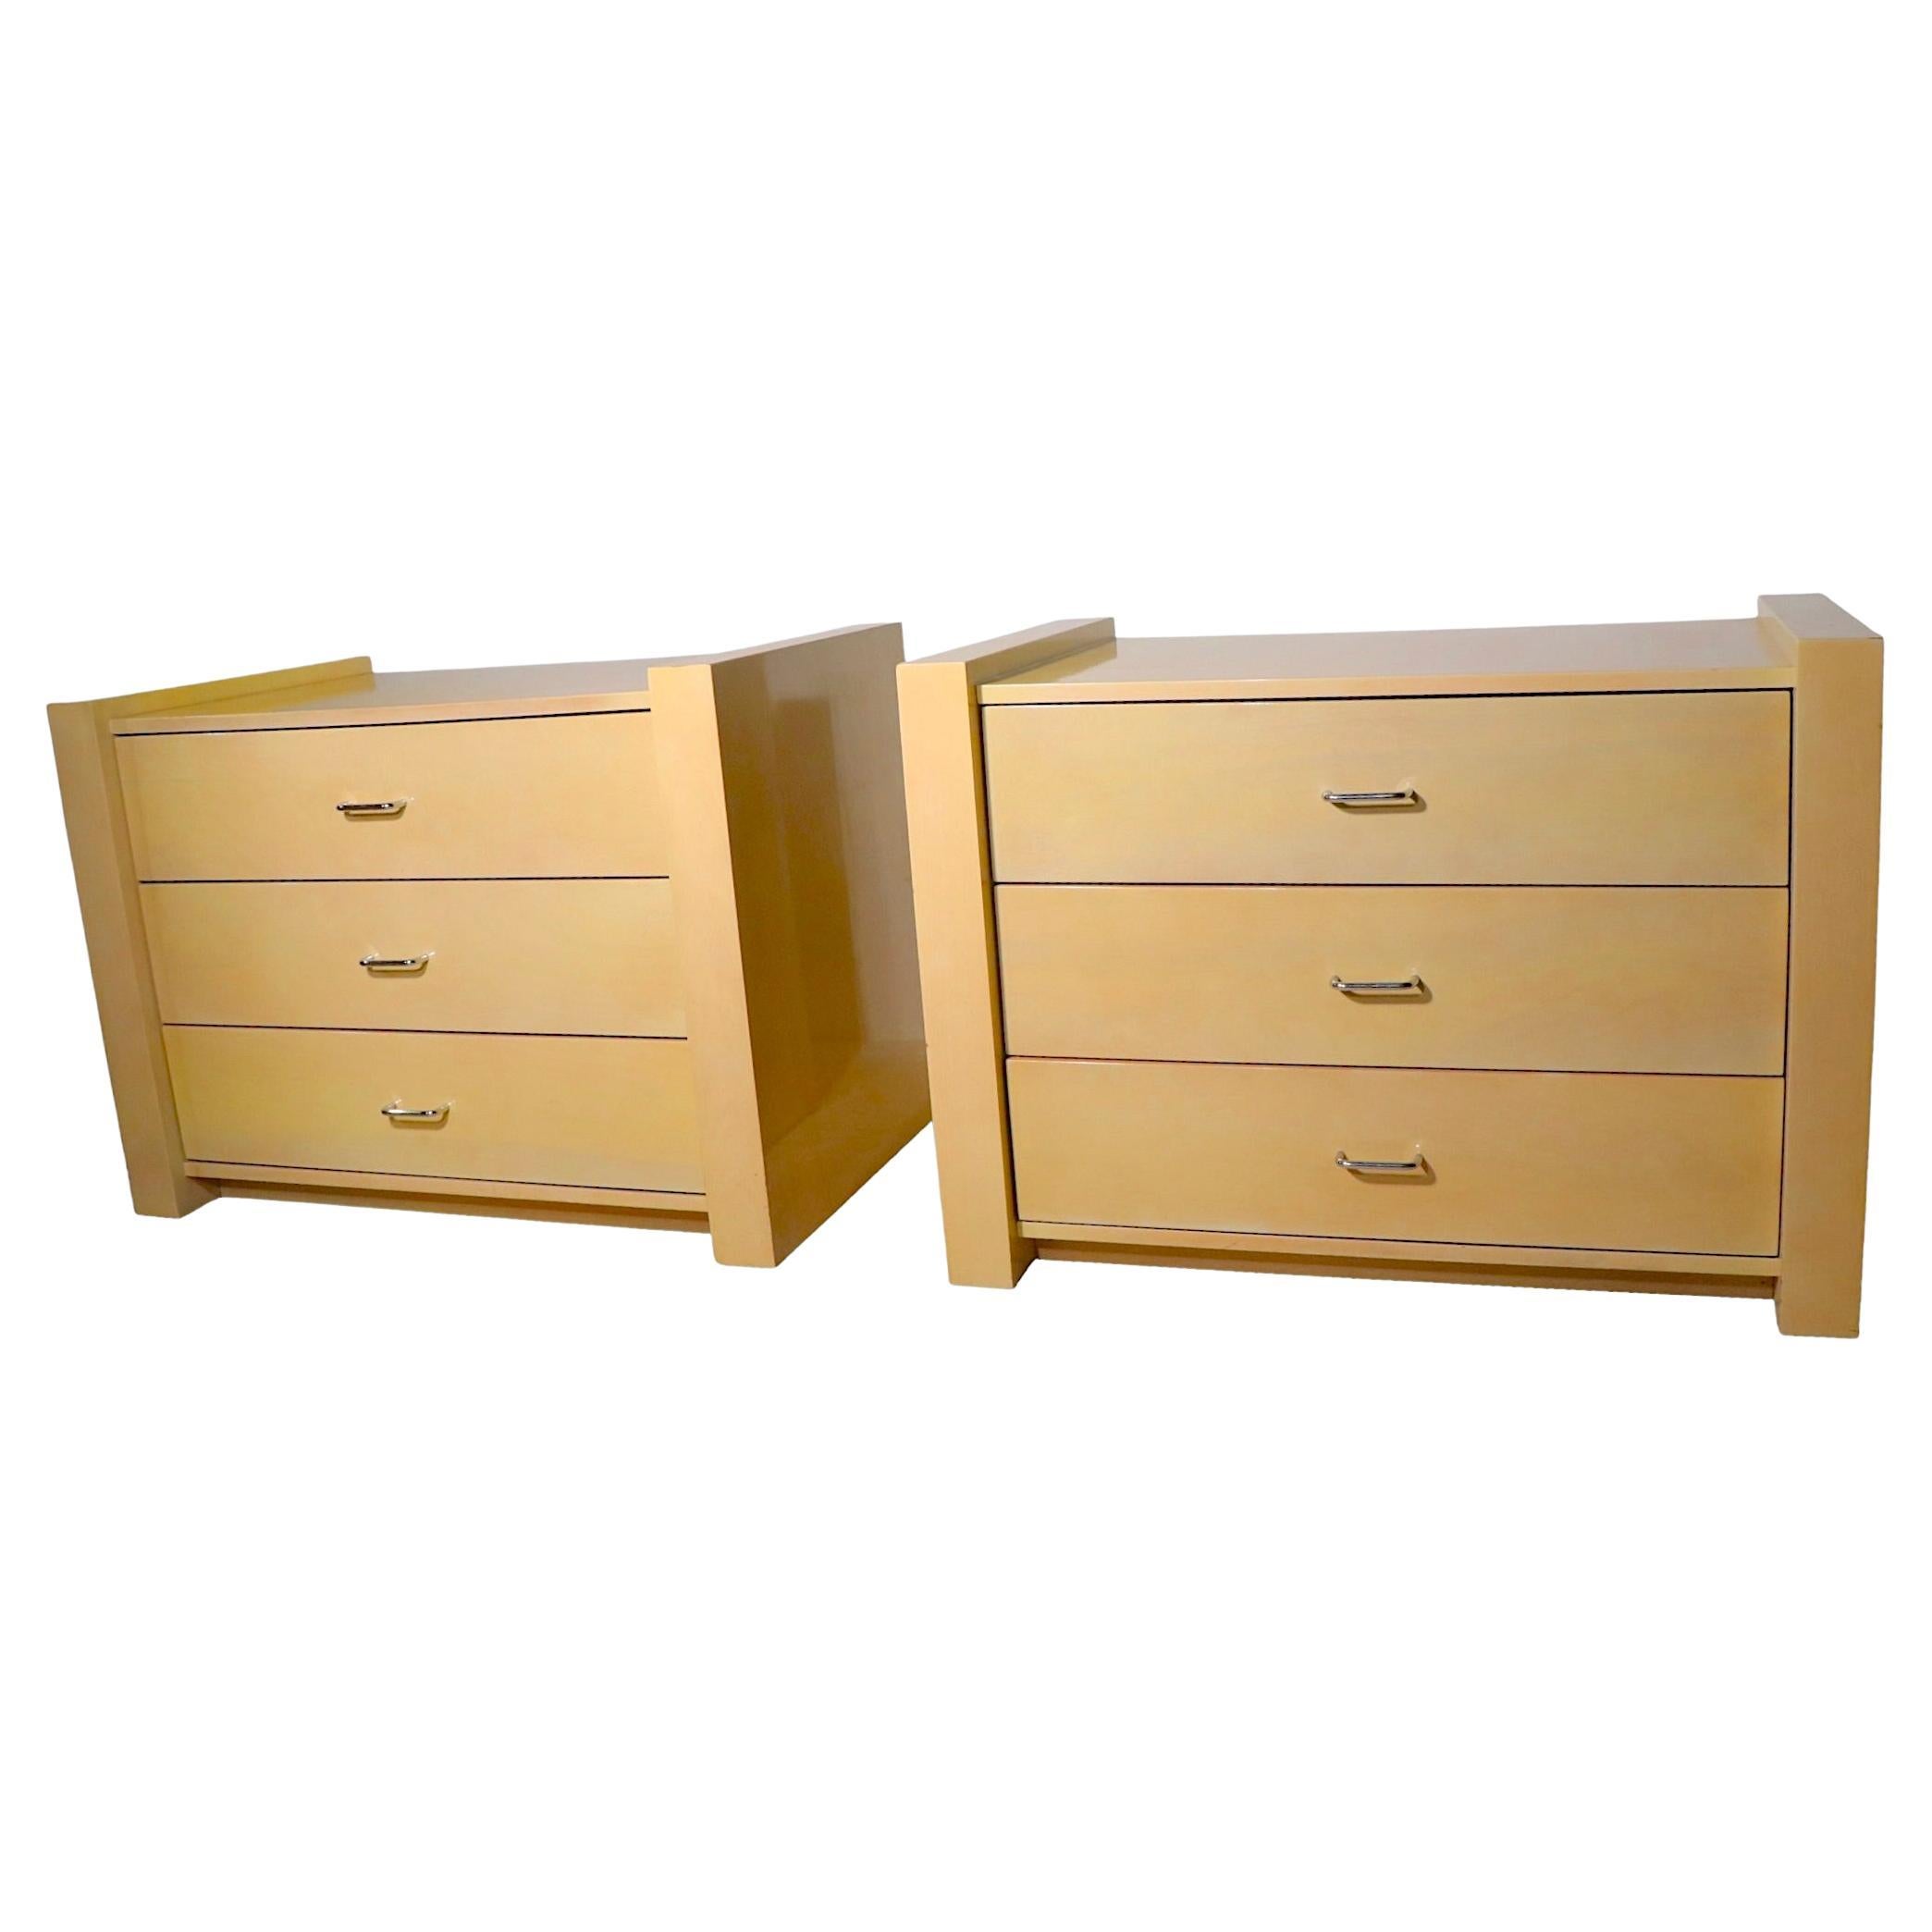 Pr. Post Modern Lacquered Three Drawer Commode Night Stands Chests